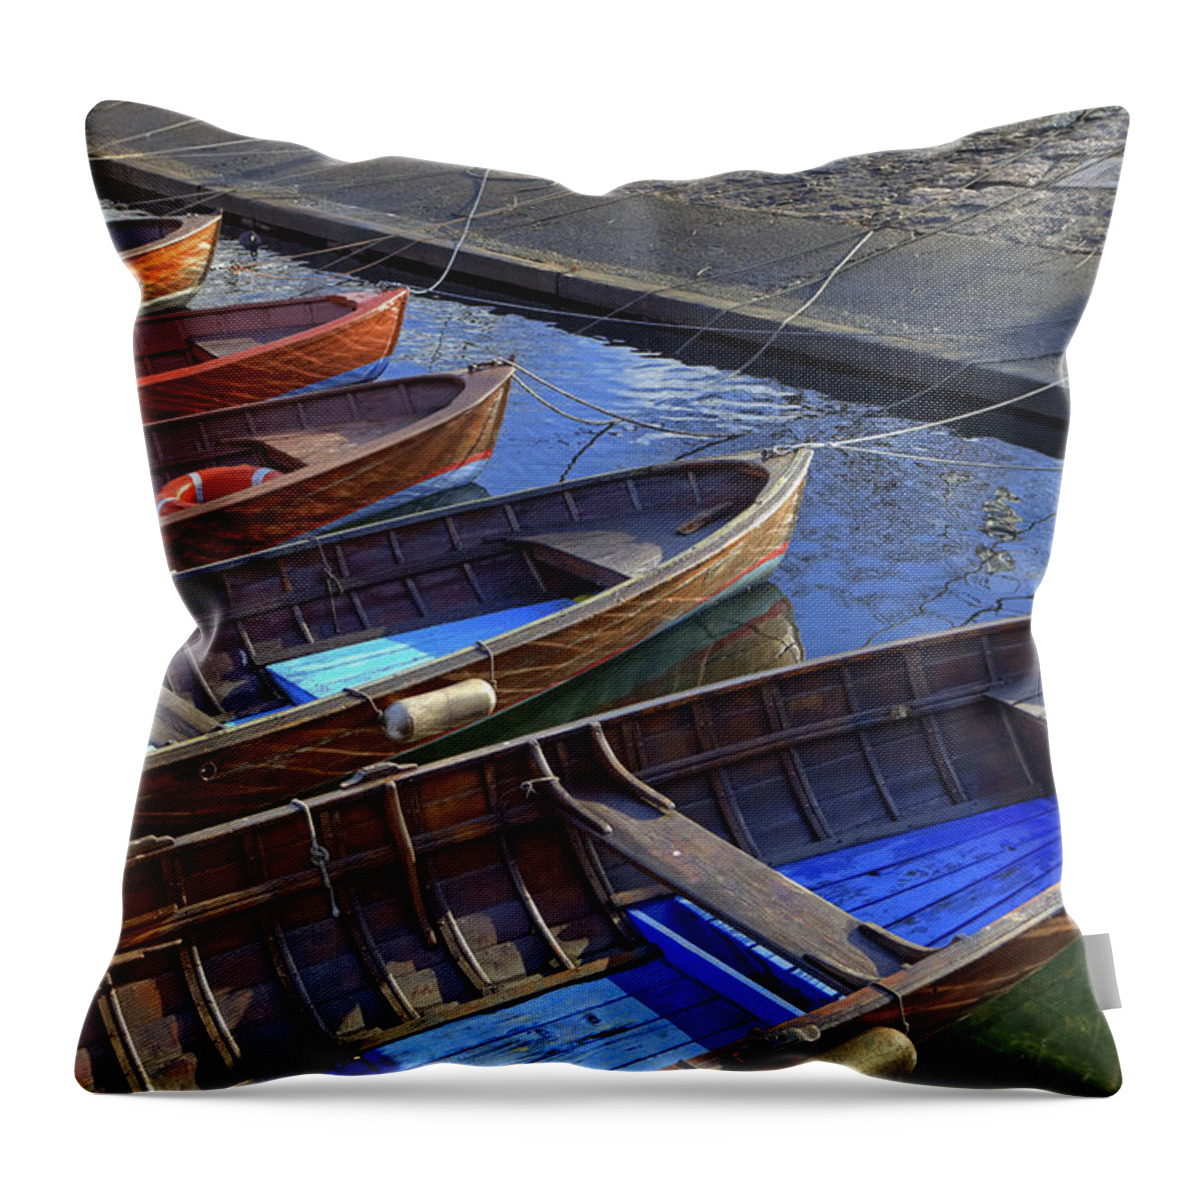 Boat Throw Pillow featuring the photograph Wooden Boats #1 by Joana Kruse